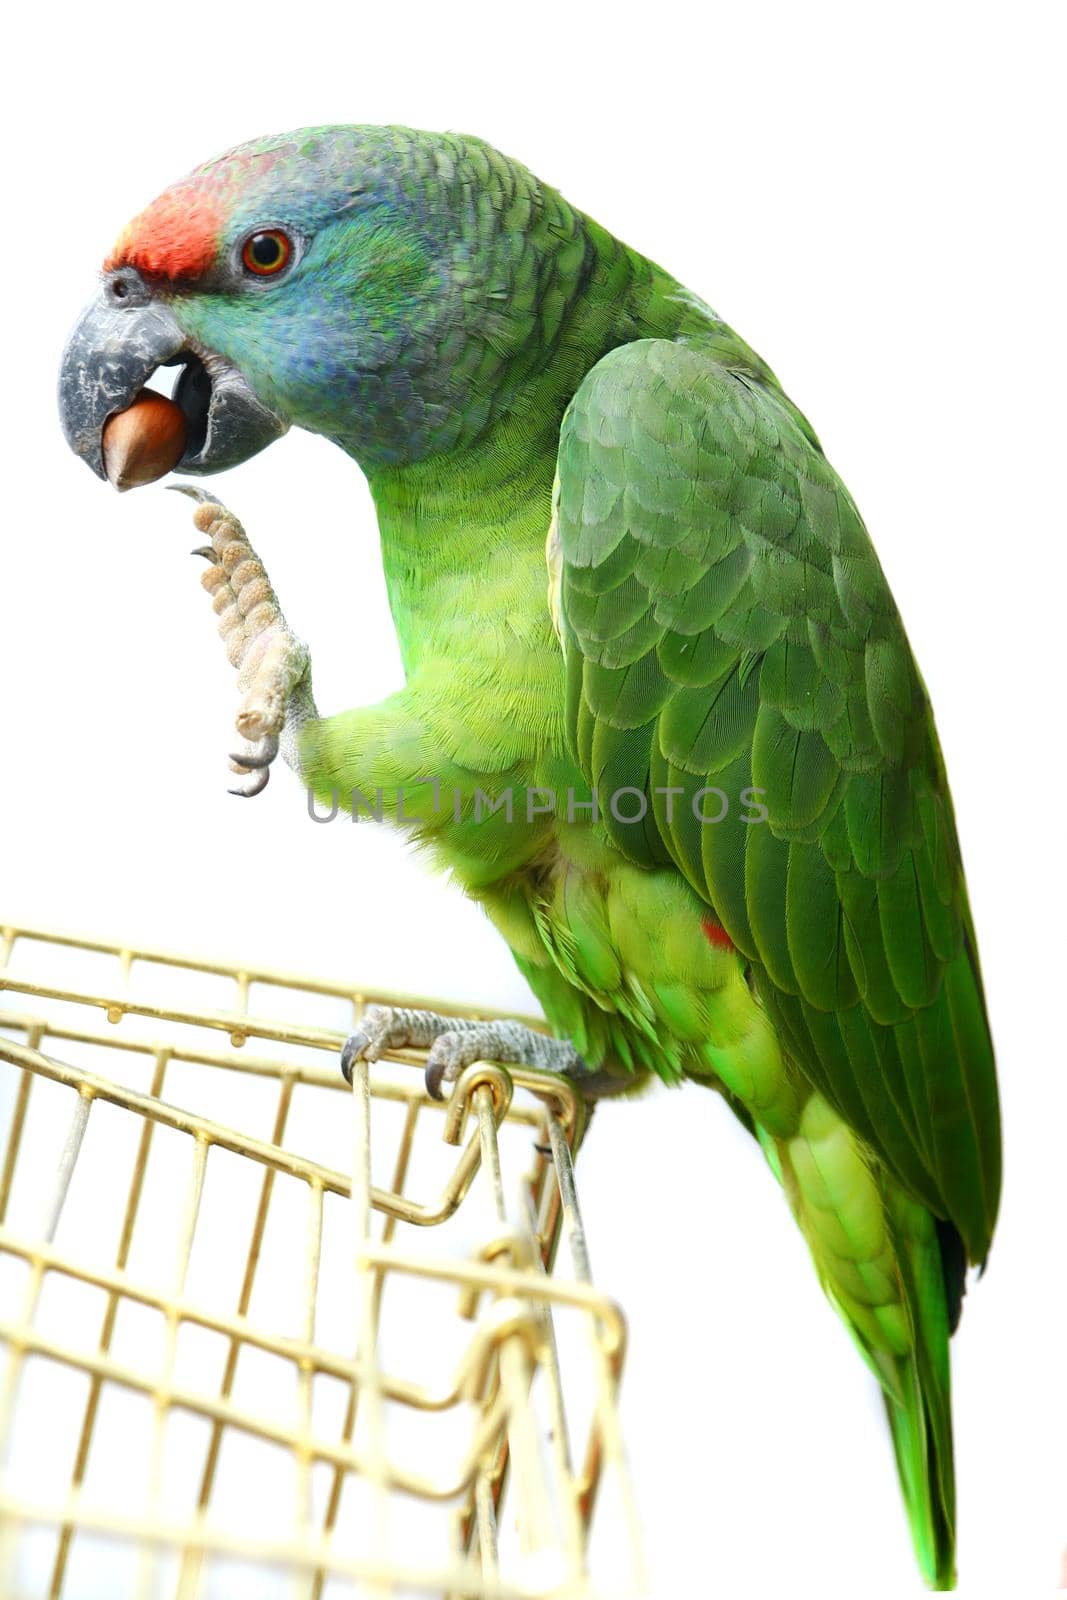 Flying festival Amazon parrot on the white background